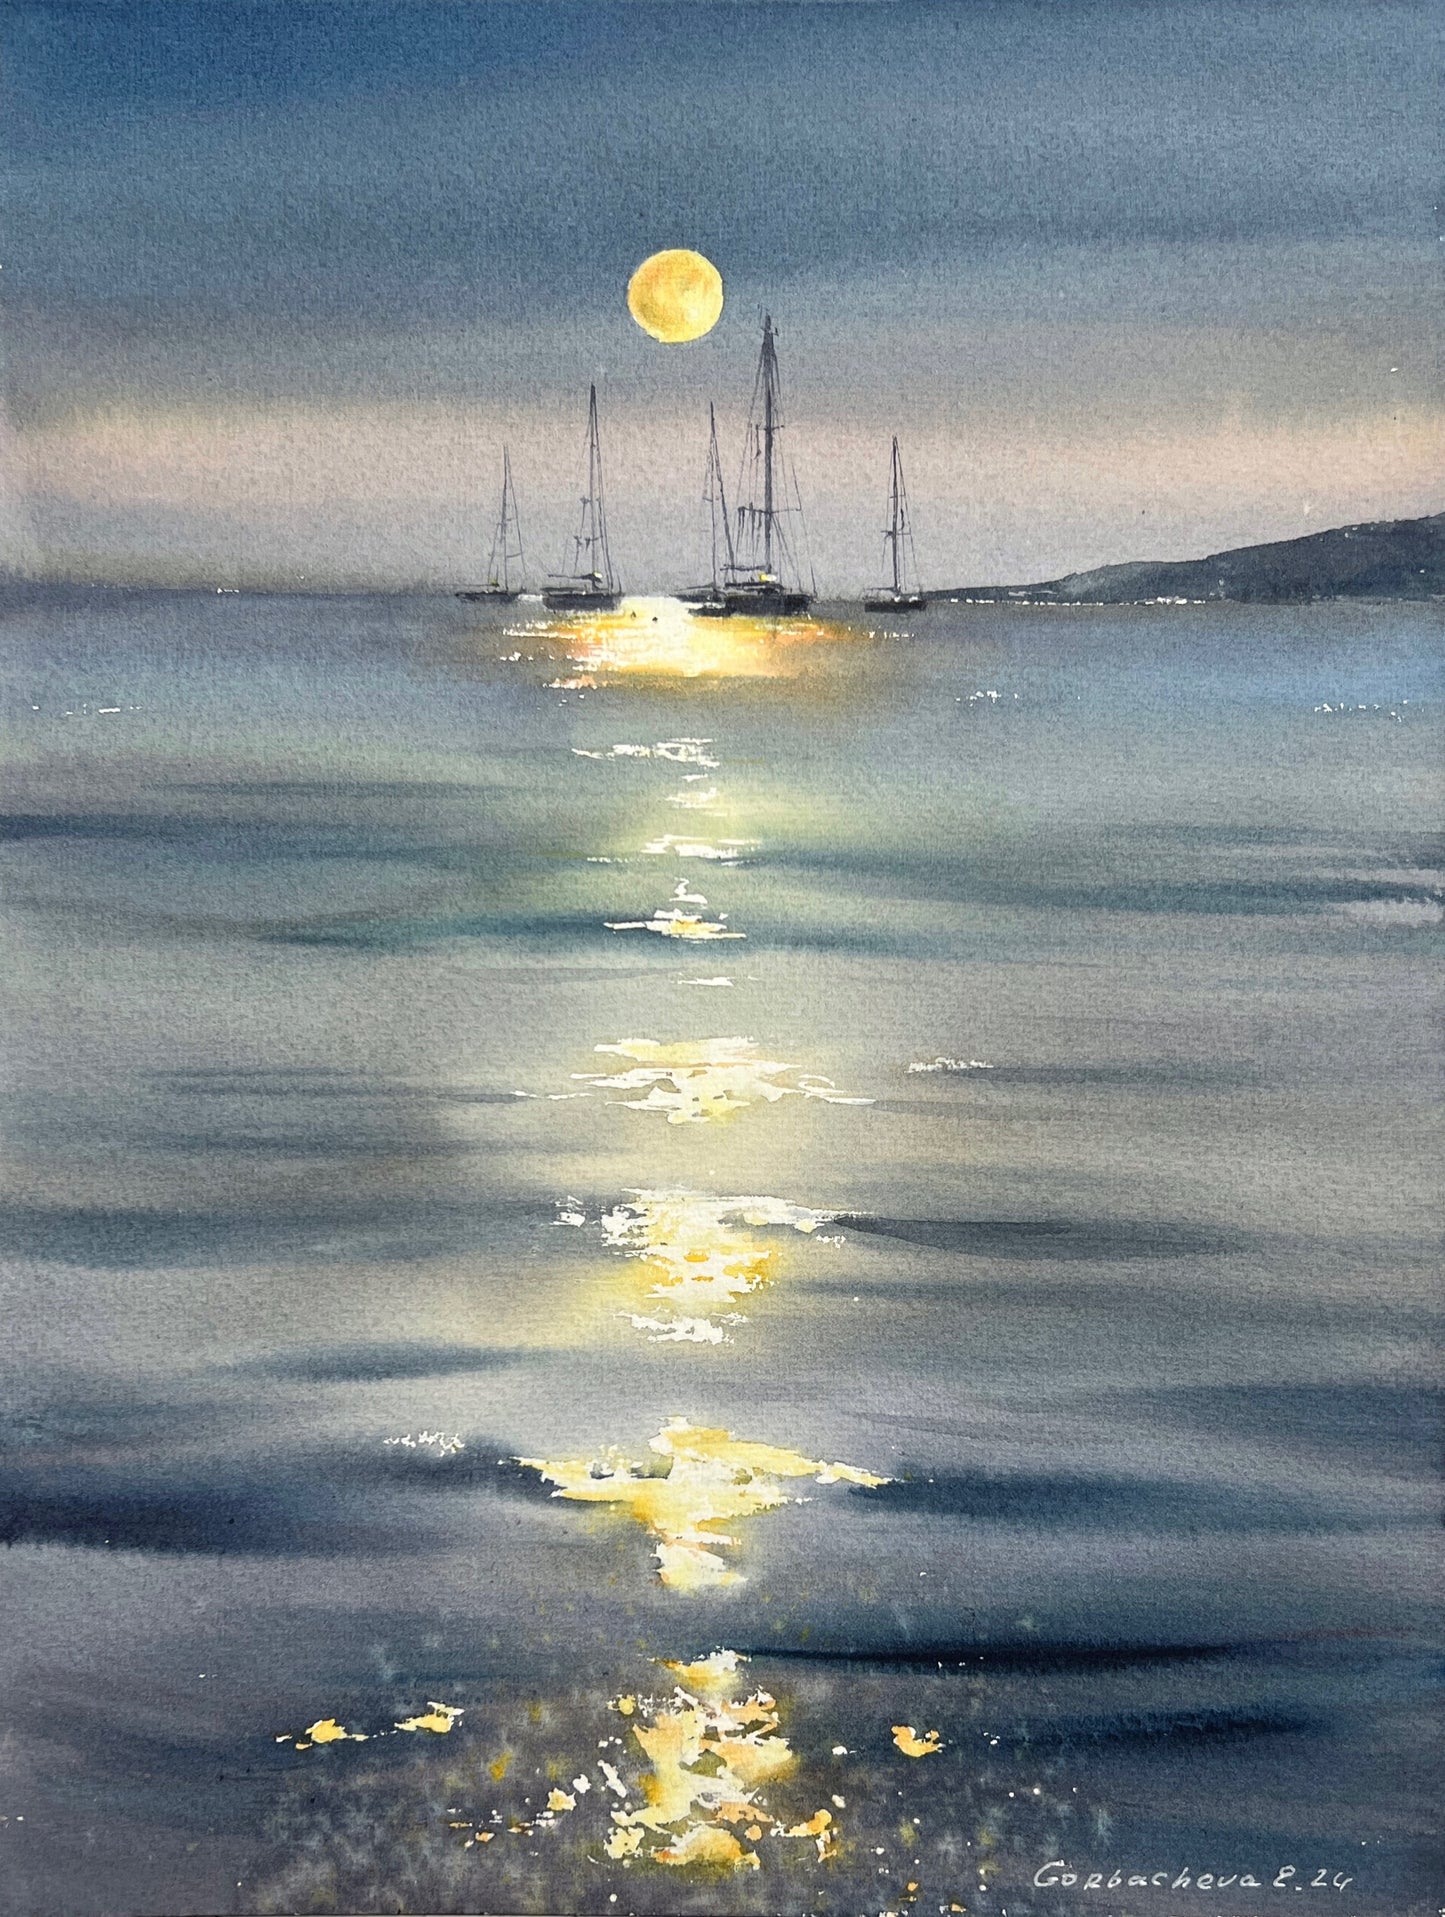 Yacht Painting Original, Small Watercolor Artwork - In the moonlight #5